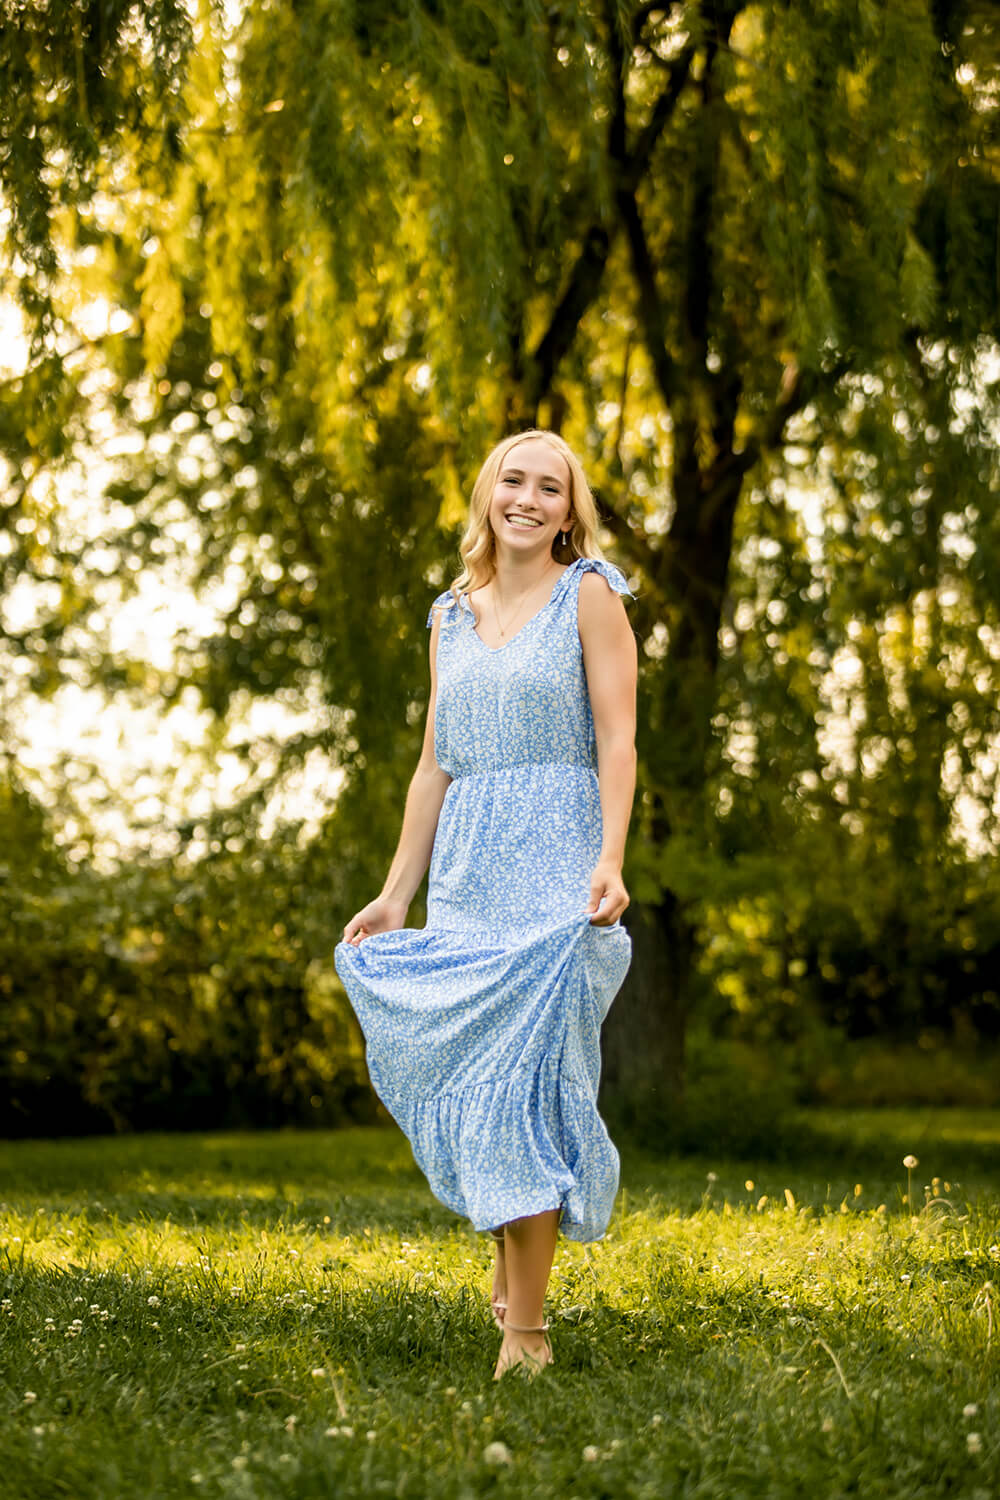 girl poses with blonde hair in a field wearing a blue dress